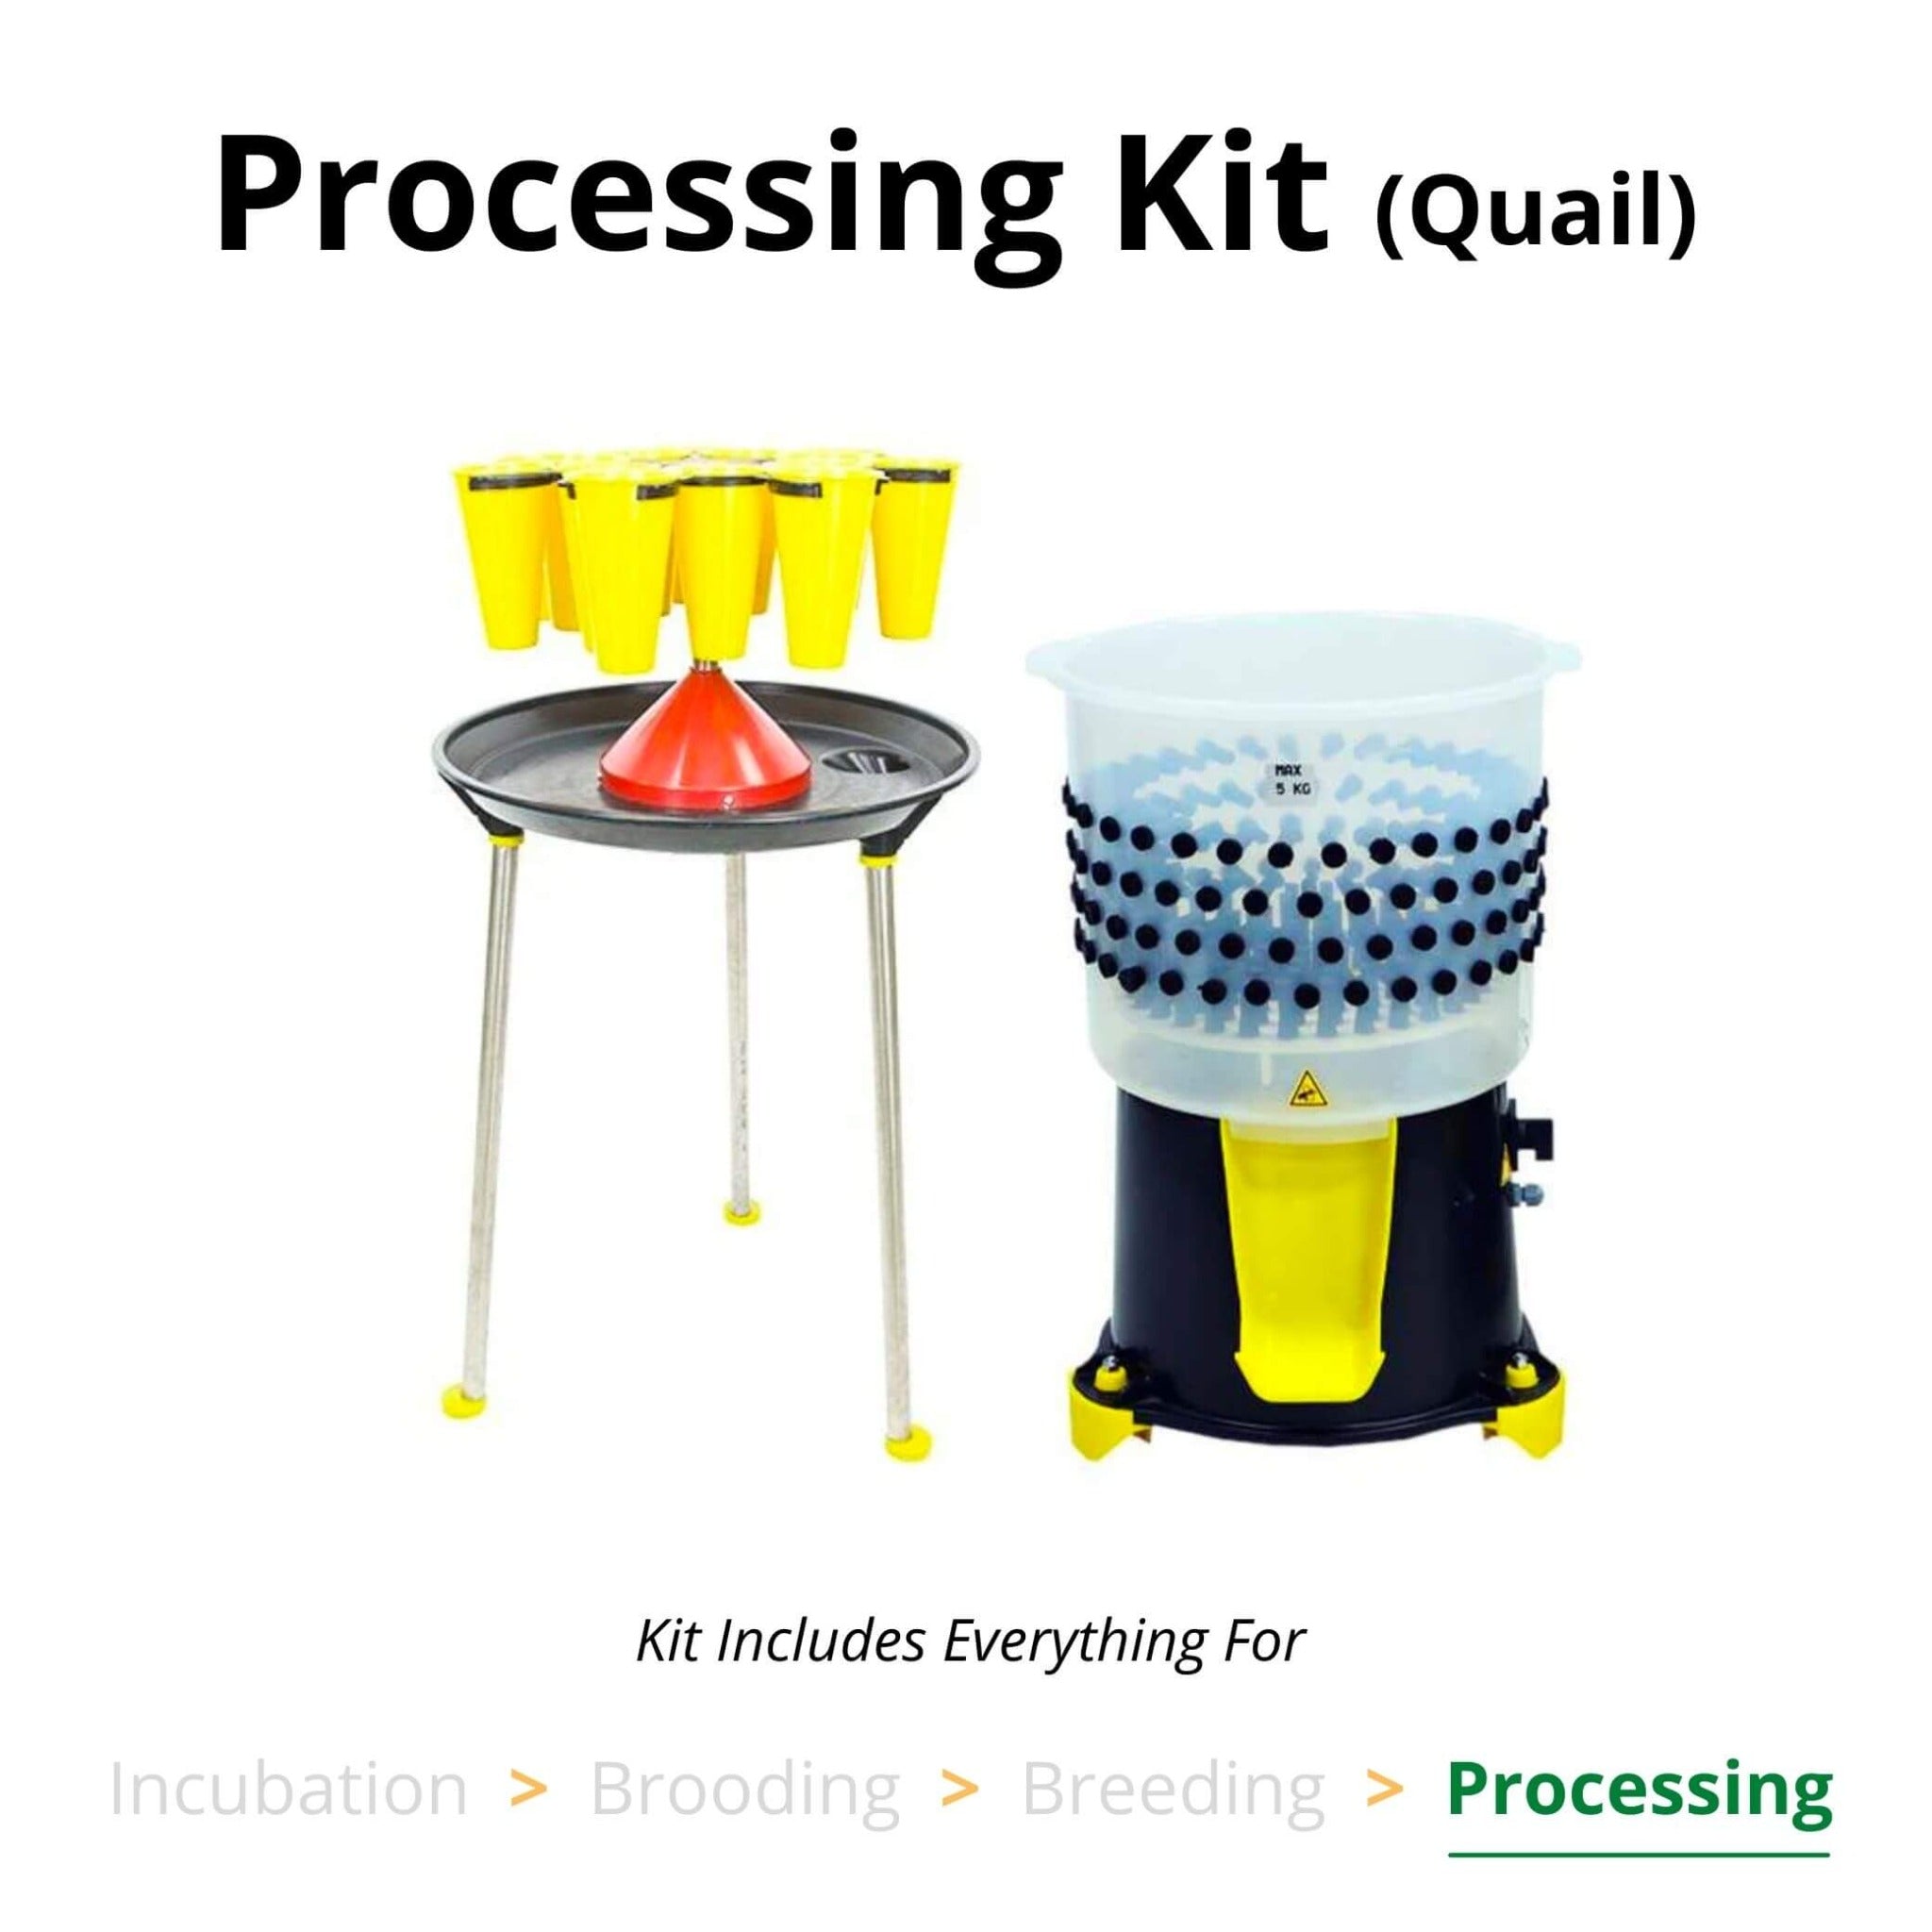 Hatching Time Cimuka. Image shows a processing kit for Quail. 3 kill cones can be seen next to a feather plucker. Image text reads “Kit includes everything for Processing”